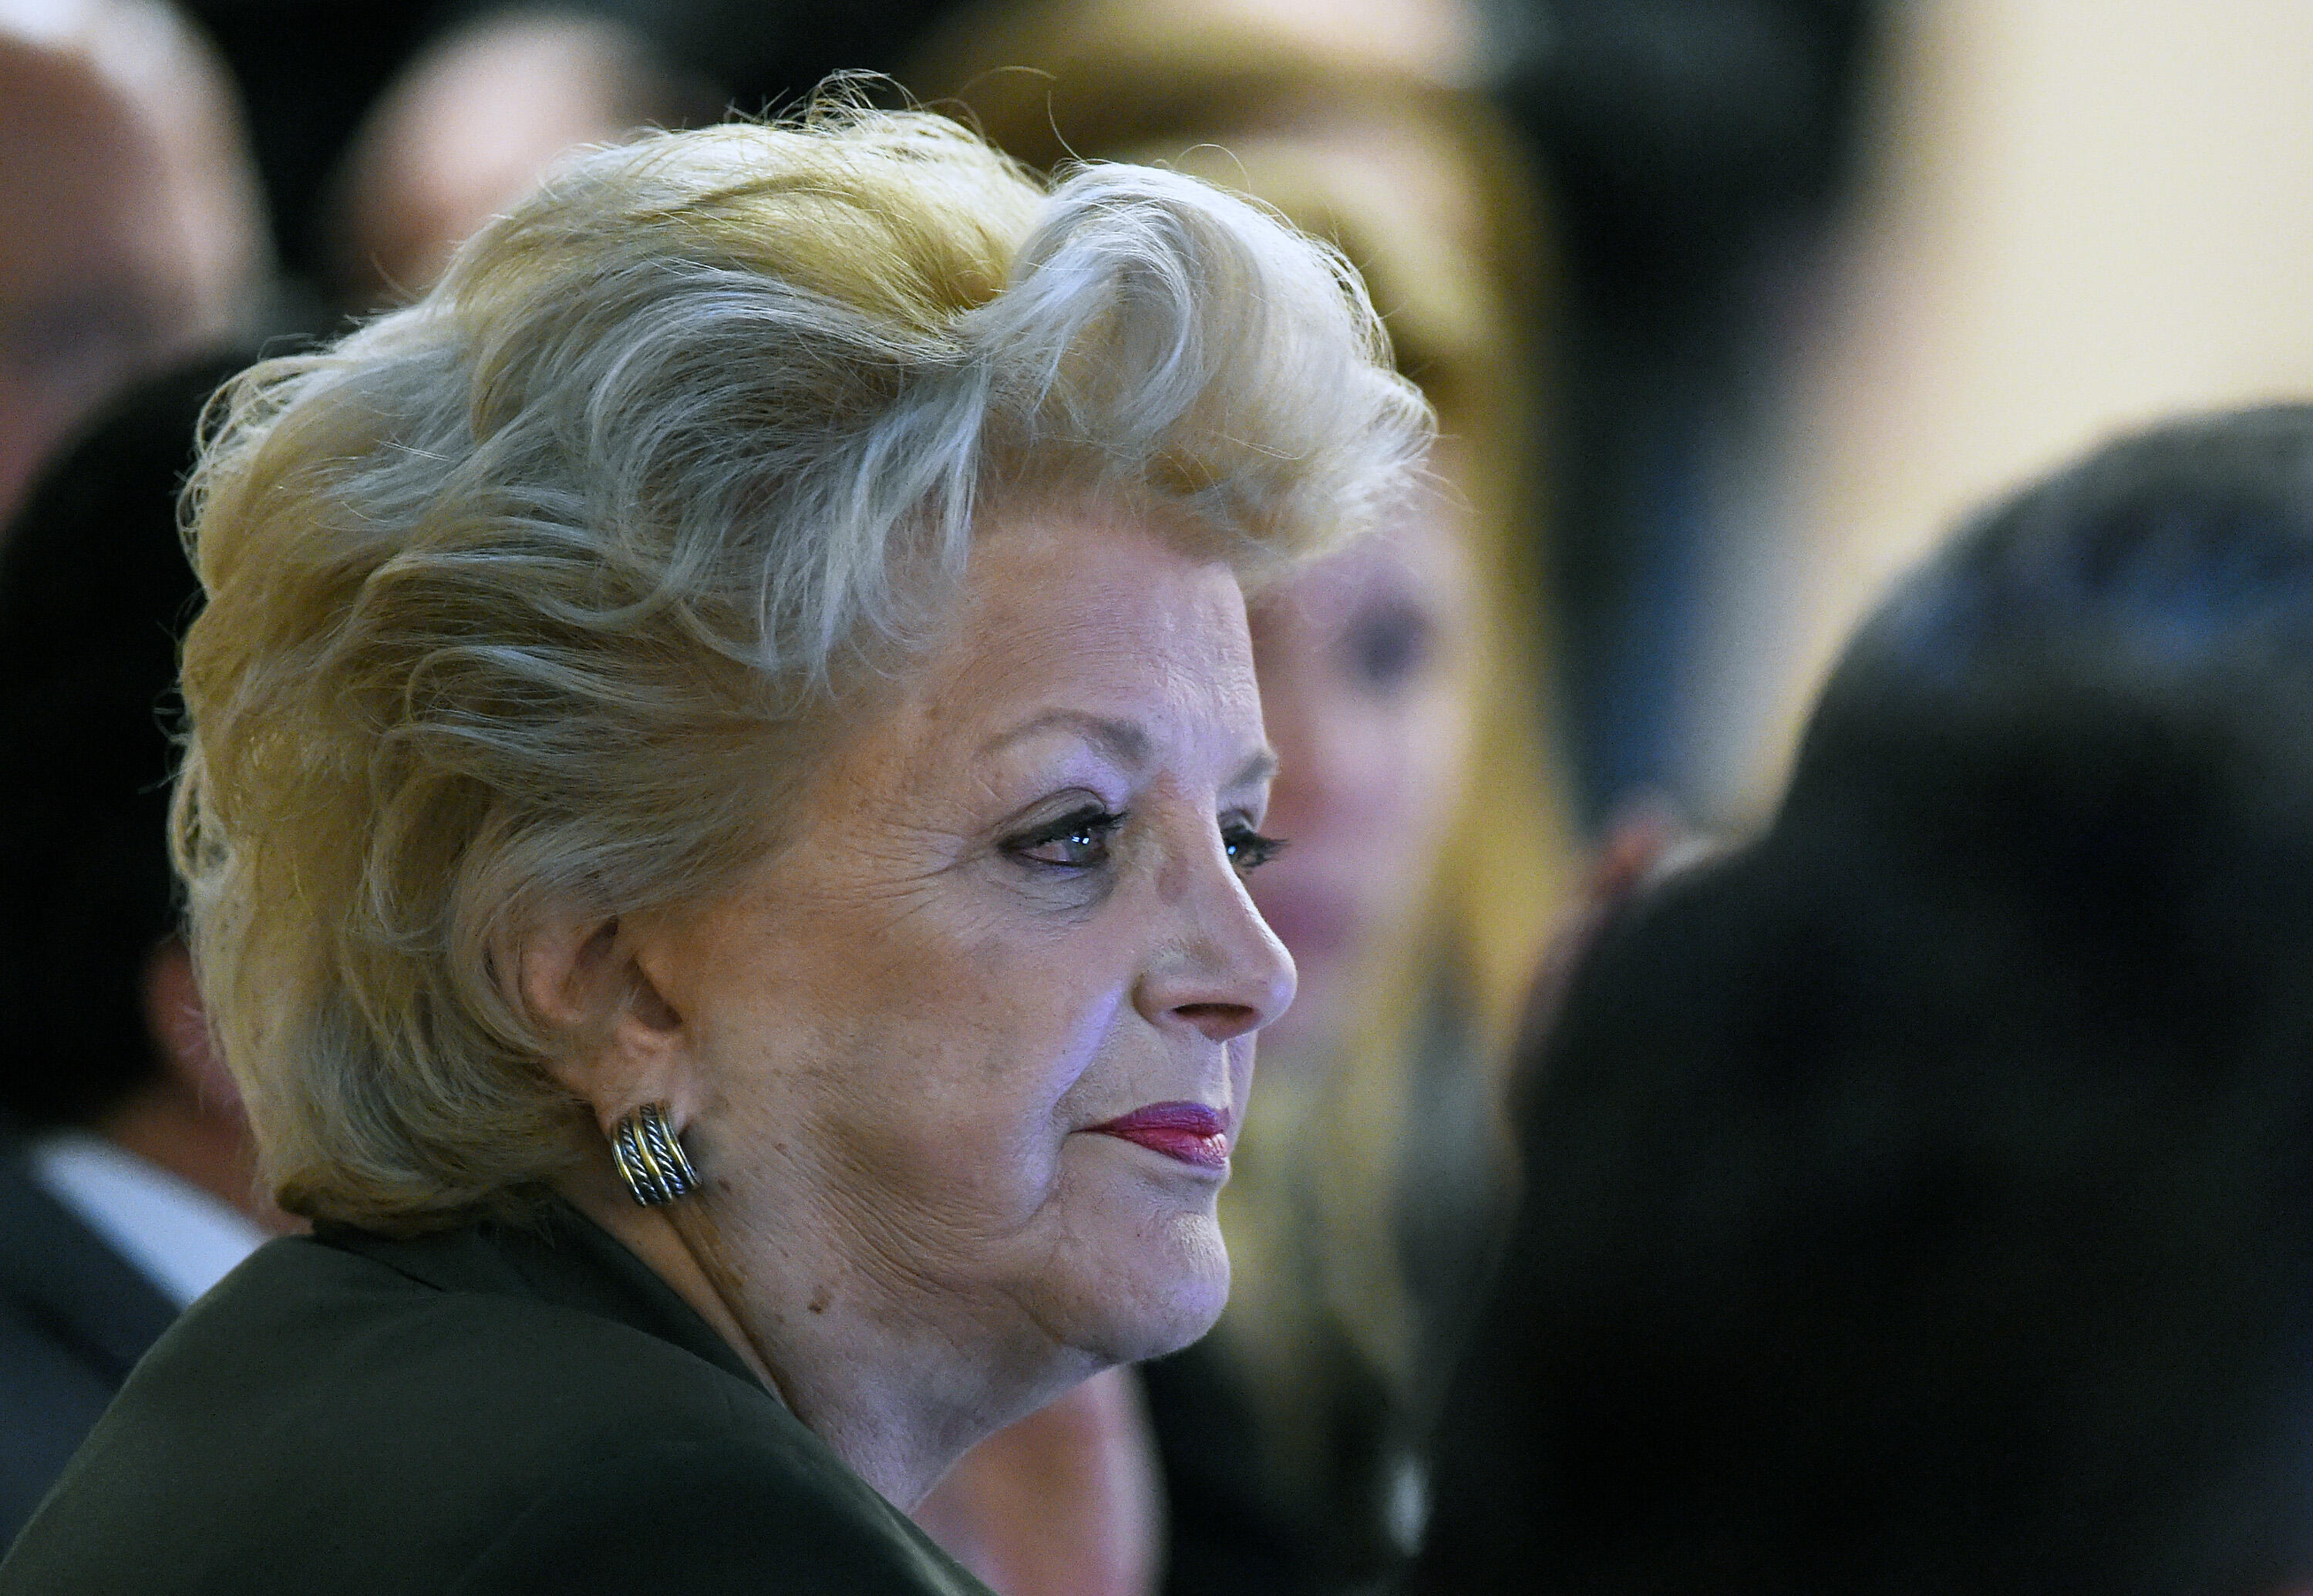 LAS VEGAS, NV - APRIL 28:  Las Vegas Mayor Carolyn Goodman listens during a Southern Nevada Tourism Infrastructure Committee meeting at UNLV with Oakland Raiders owner Mark Davis (not pictured) on April 28, 2016 in Las Vegas, Nevada. Davis told the commit